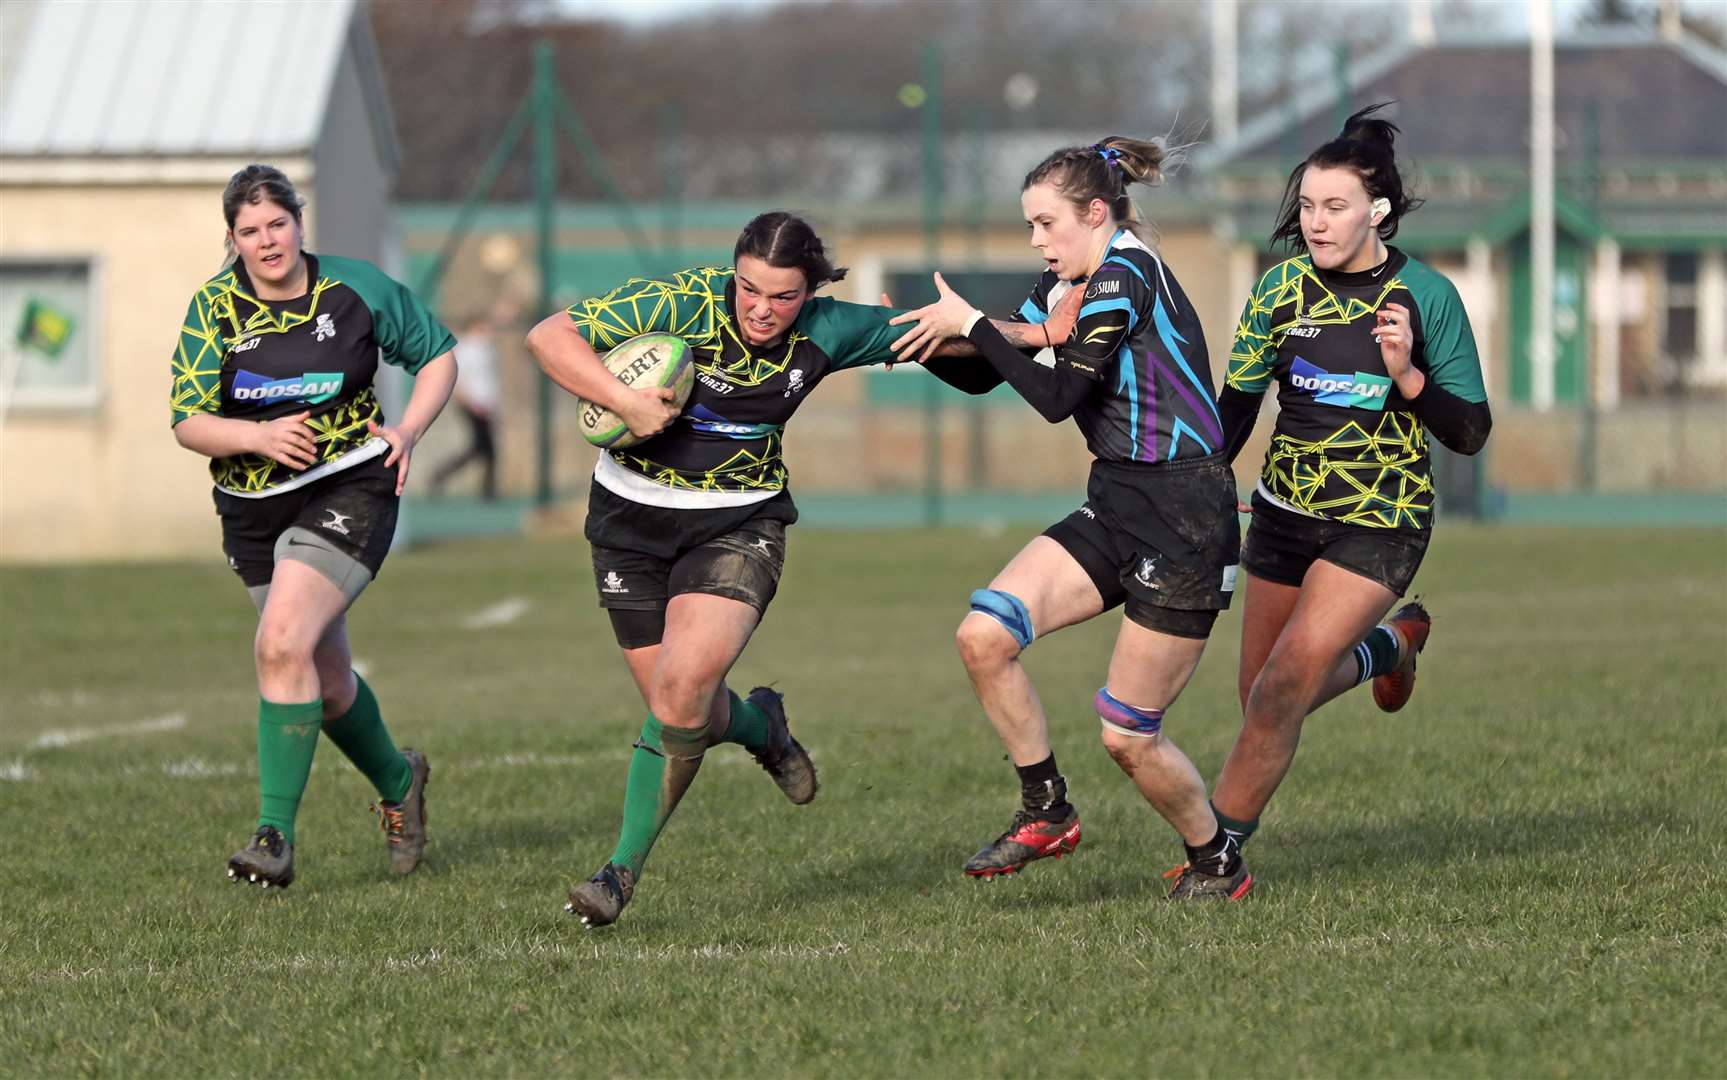 Emmie Smith brushes off a tackle during the Krakens' recent 96-12 victory over Fraserburgh. Picture: James Gunn